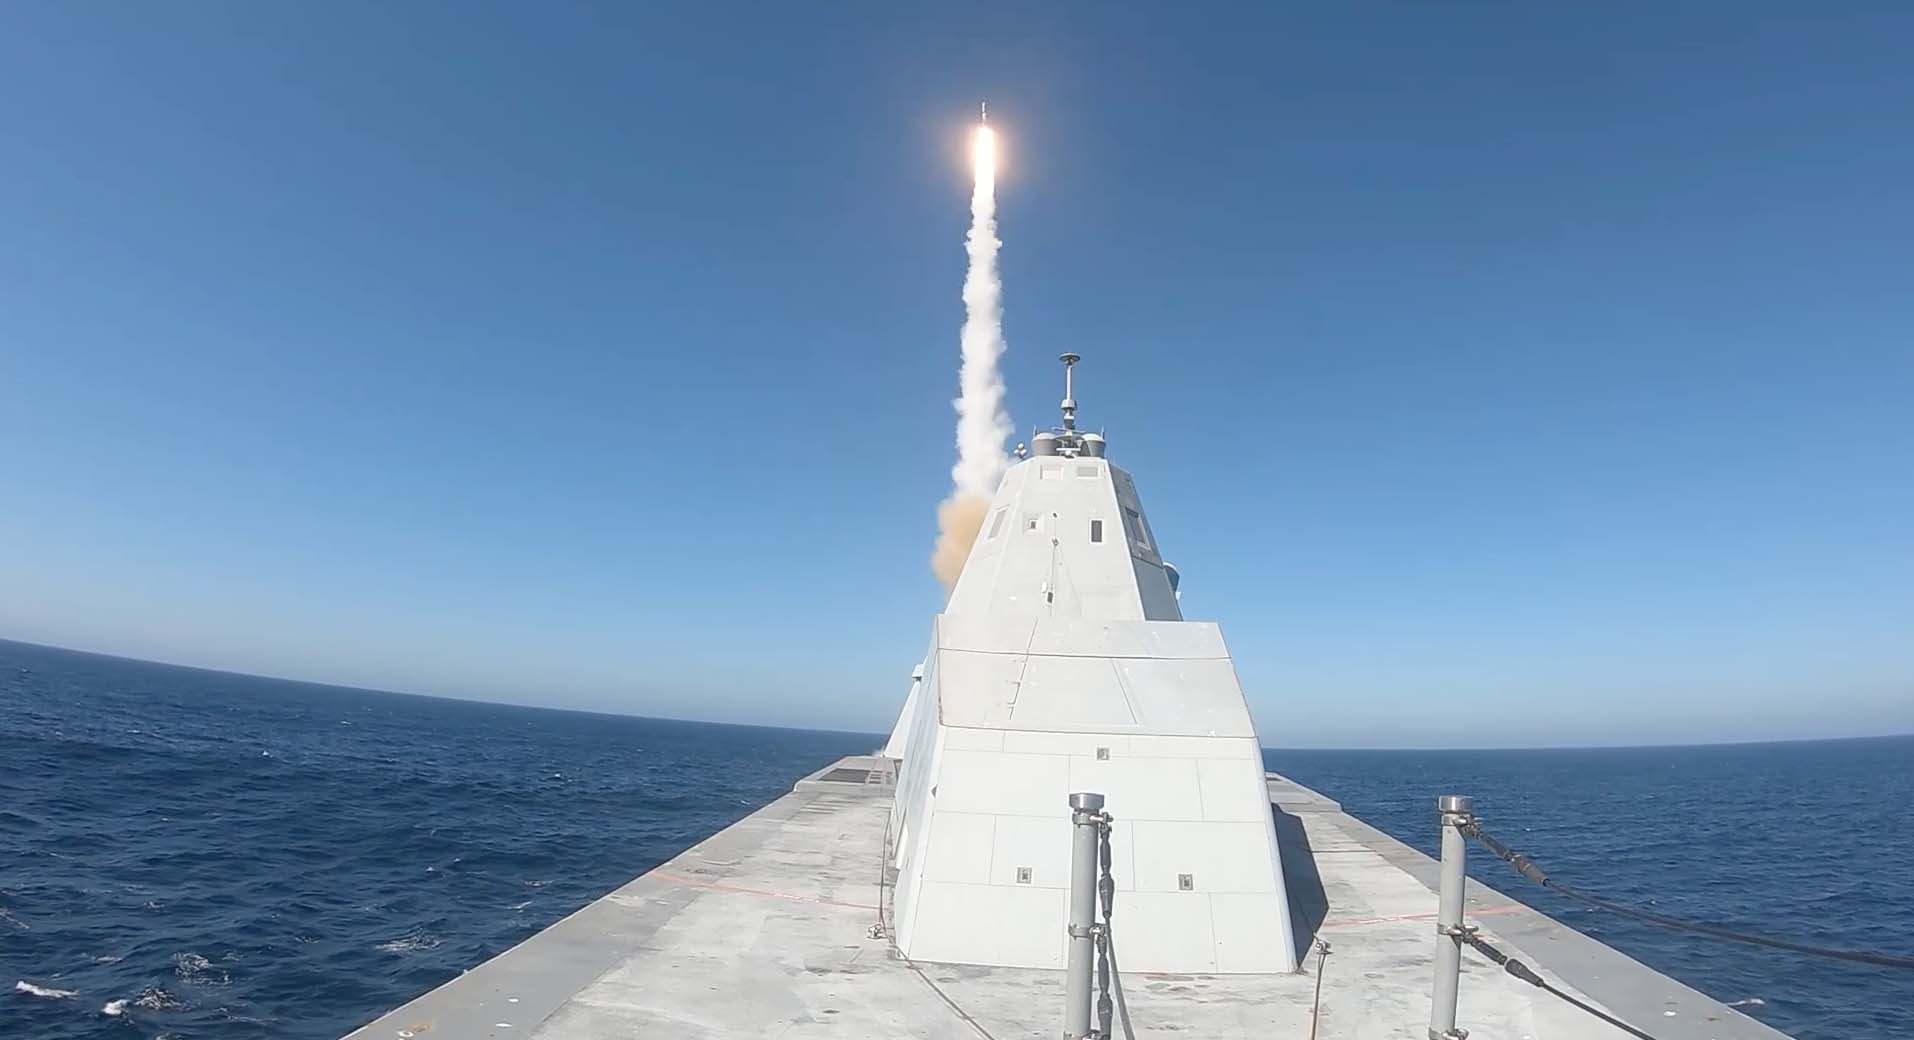 The USS Zumwalt (DDG 1000) successfully executed the first live-fire test of the Mark 57 Vertical Launching System with a Standard Missile-2 (SM-2) on the Naval Air Warfare Center Weapons Division Sea Test Range, Point Mugu, on Oct. 13.